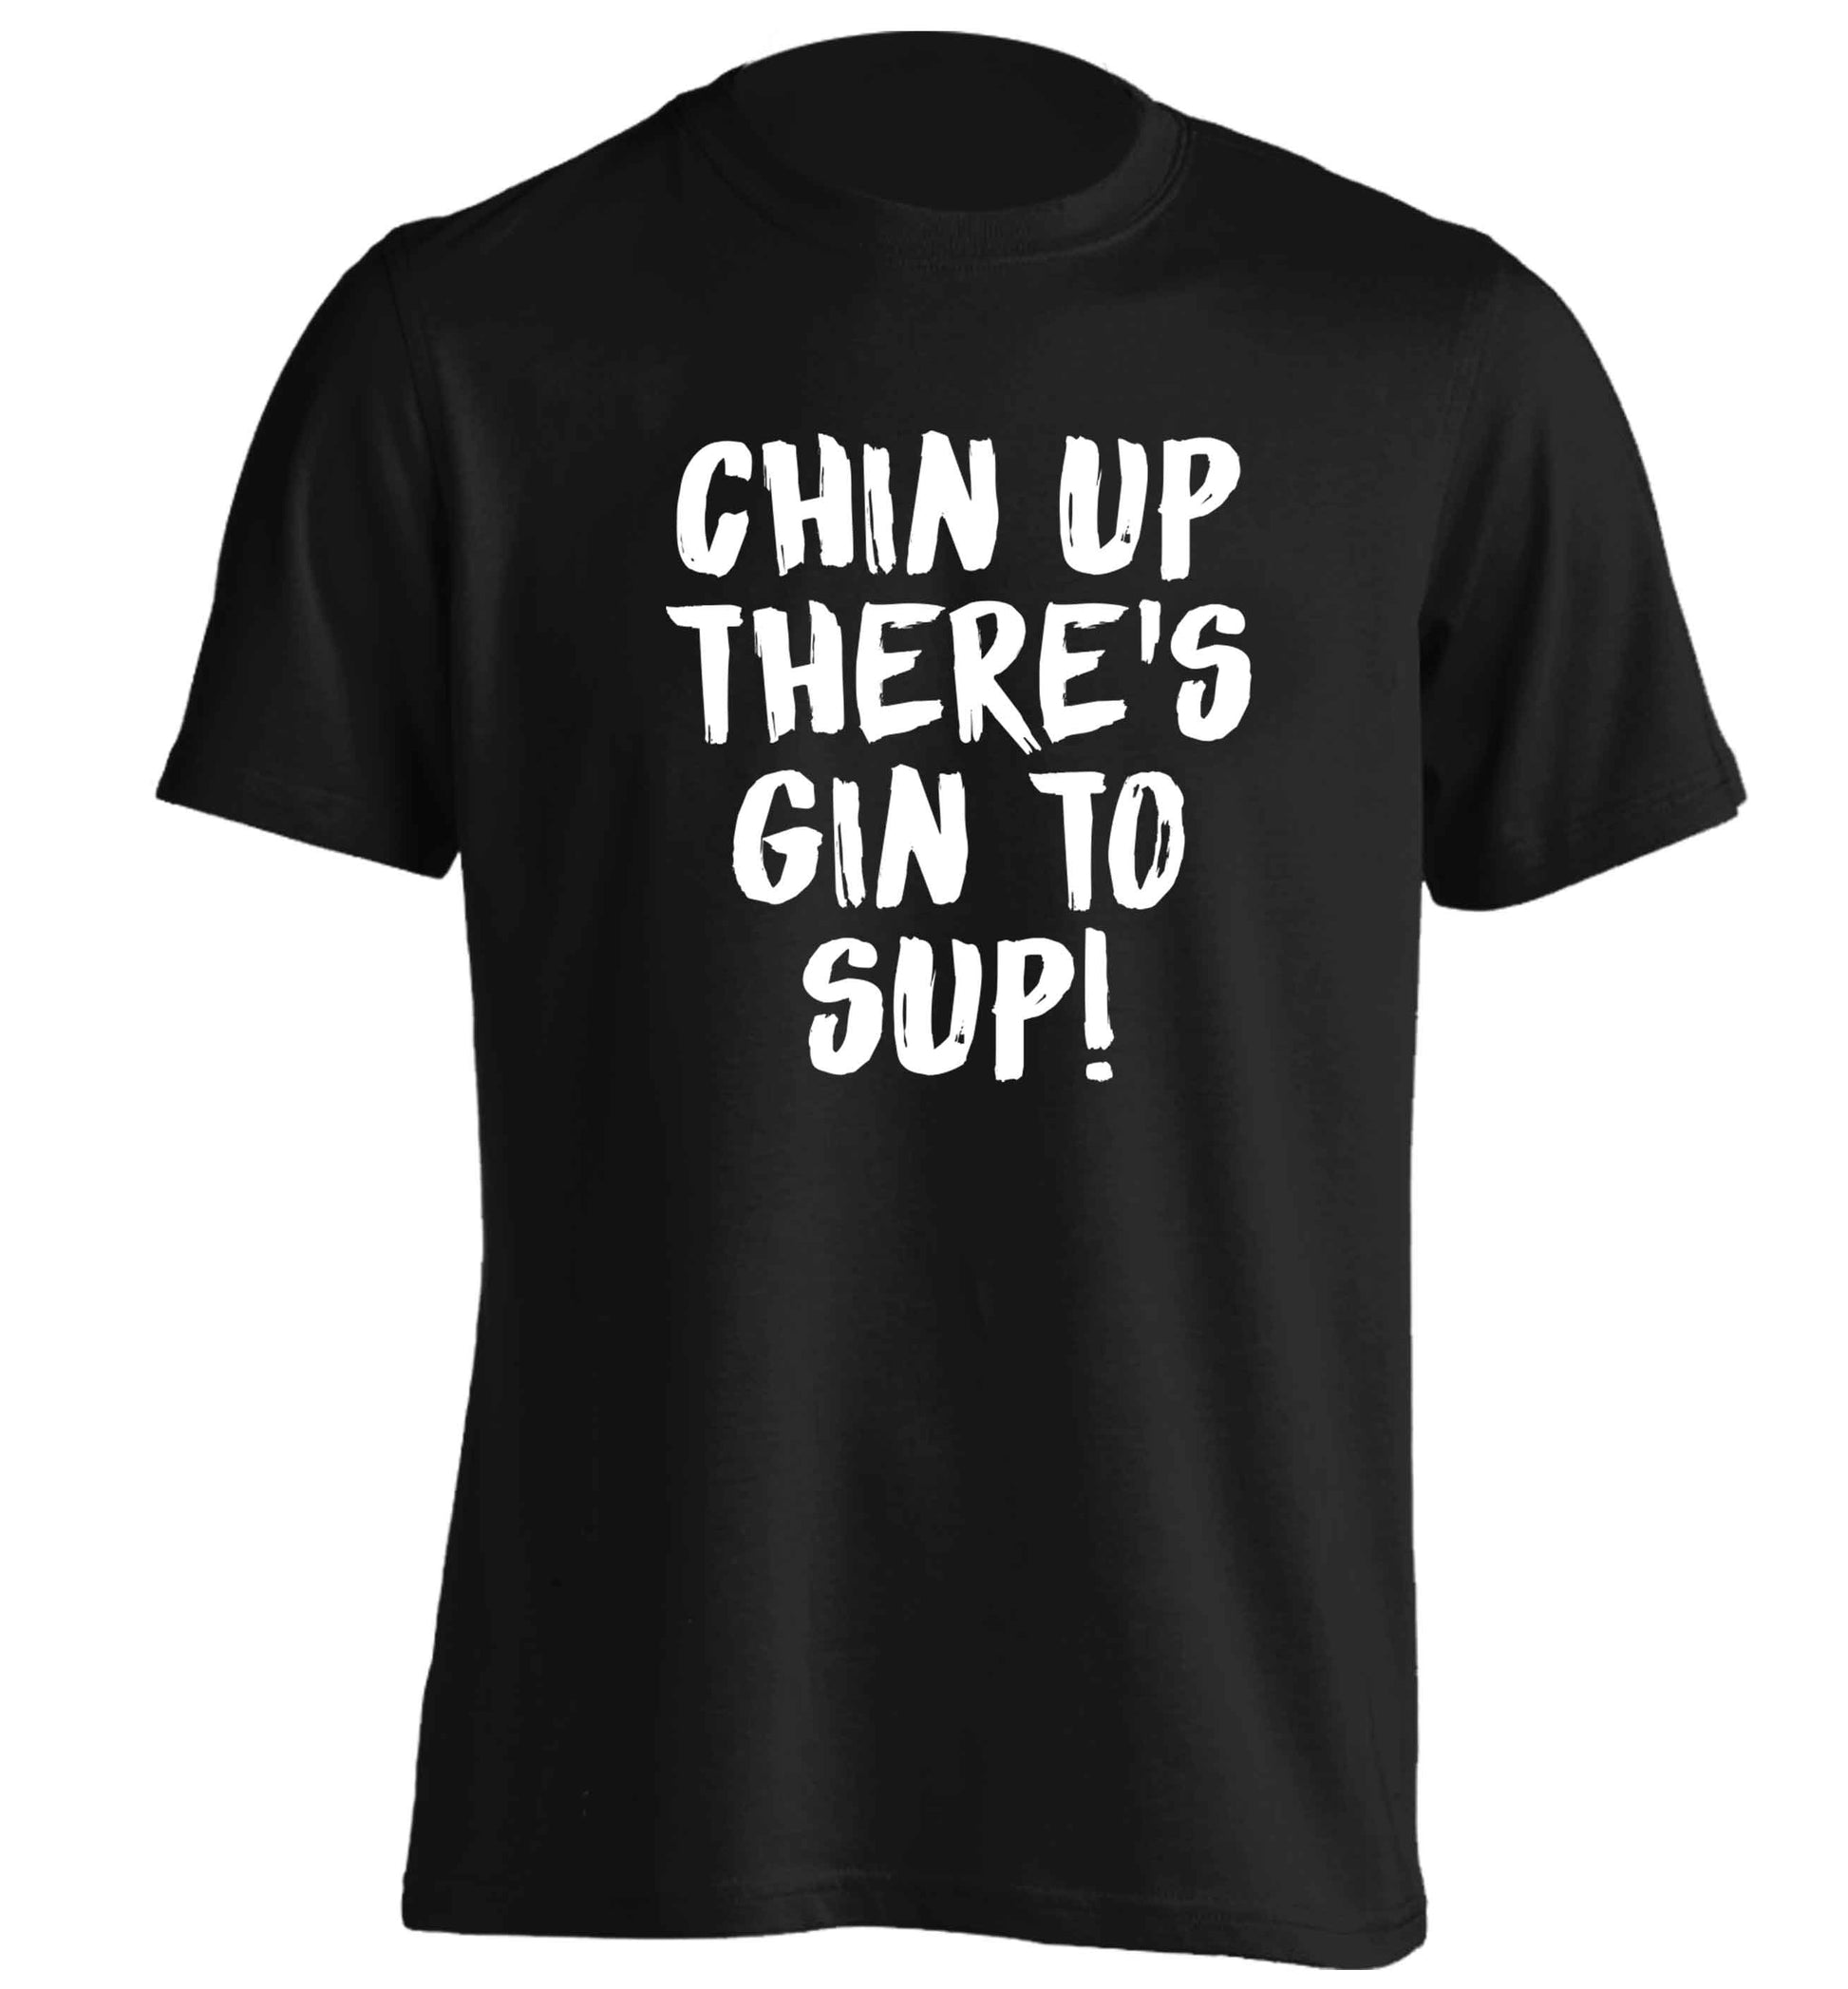 Chin up there's gin to sup adults unisex black Tshirt 2XL